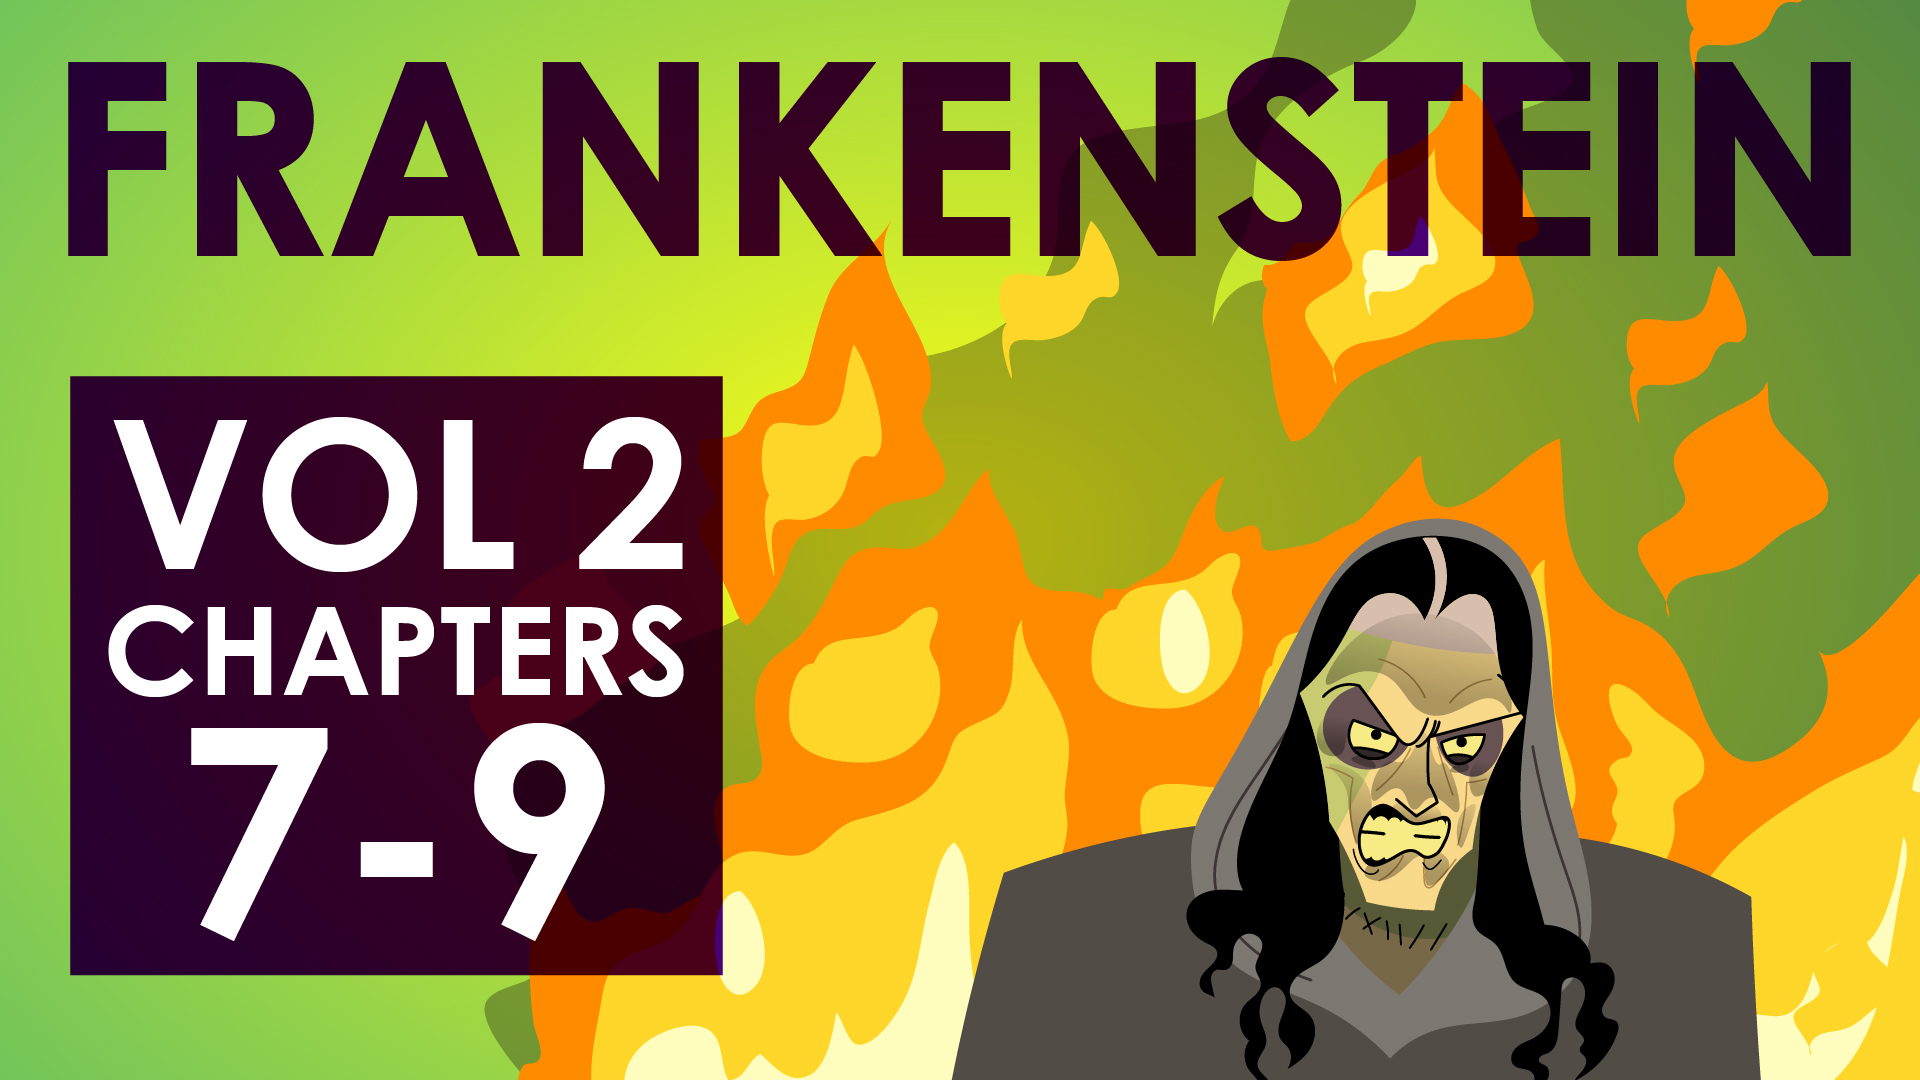 Frankenstein - Mary Shelley - Volume 2 Chapters 7-9 - Powering Through Prose Series	